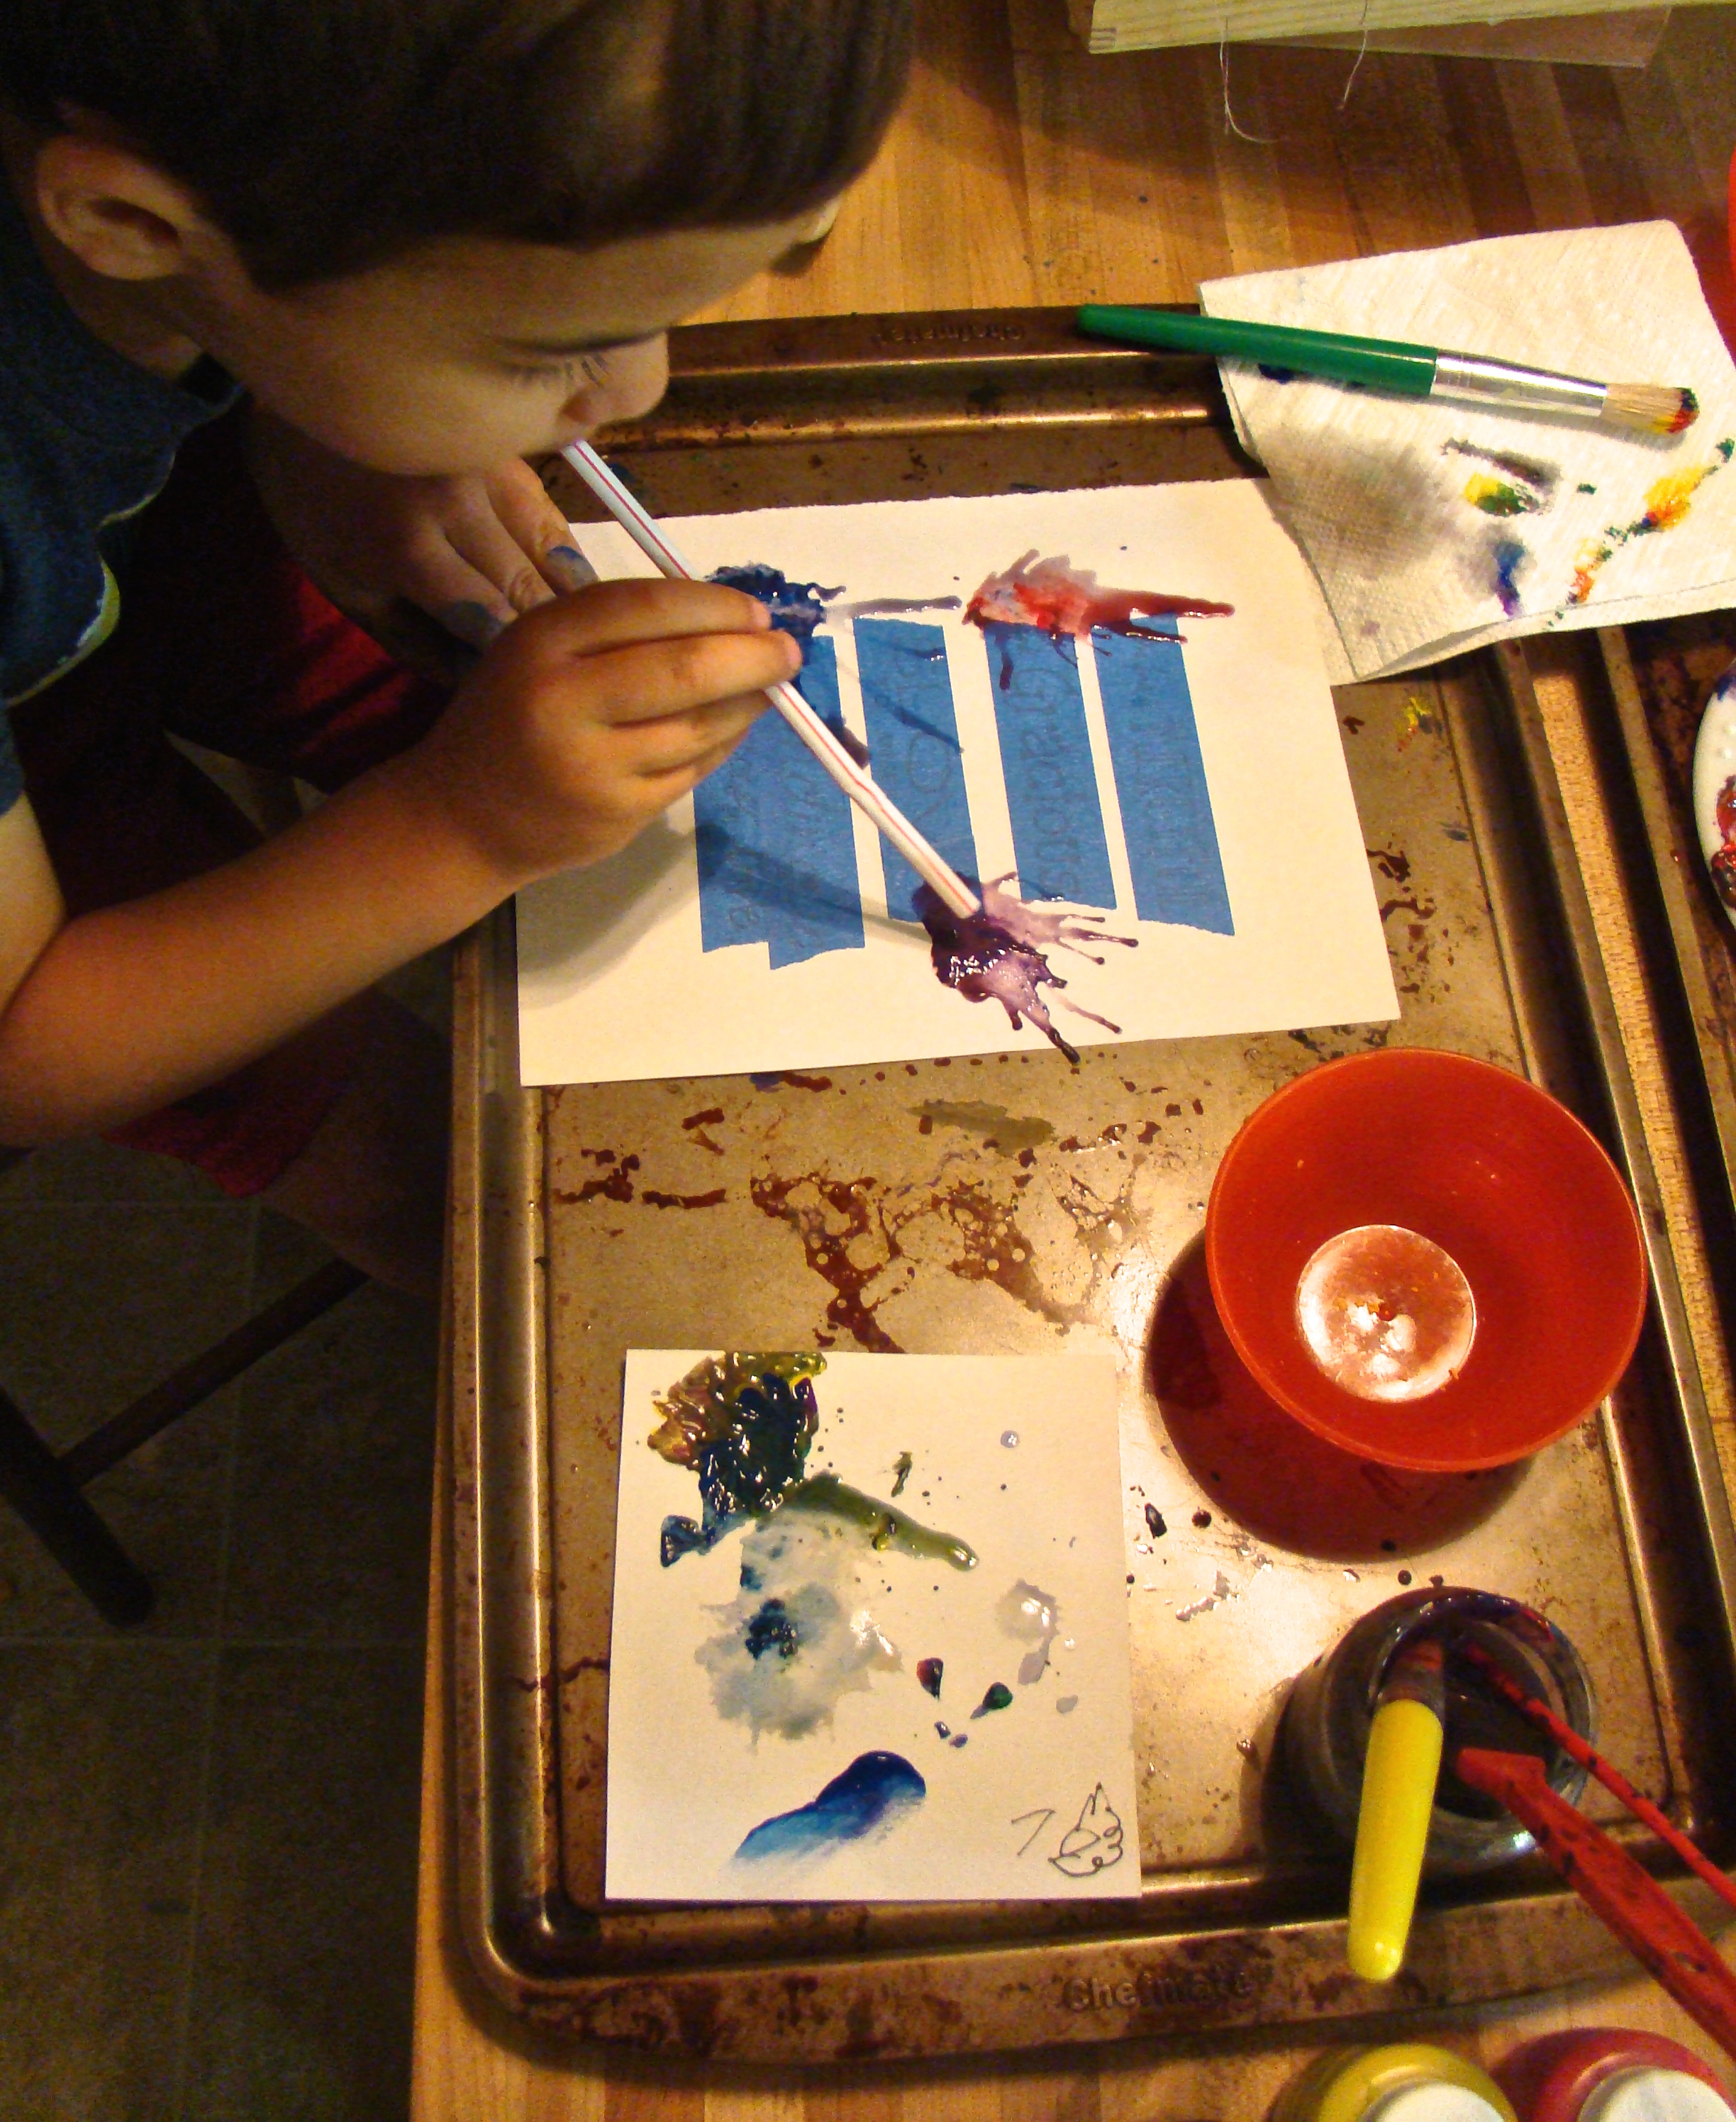 Scripture Painting Activity for Young Children